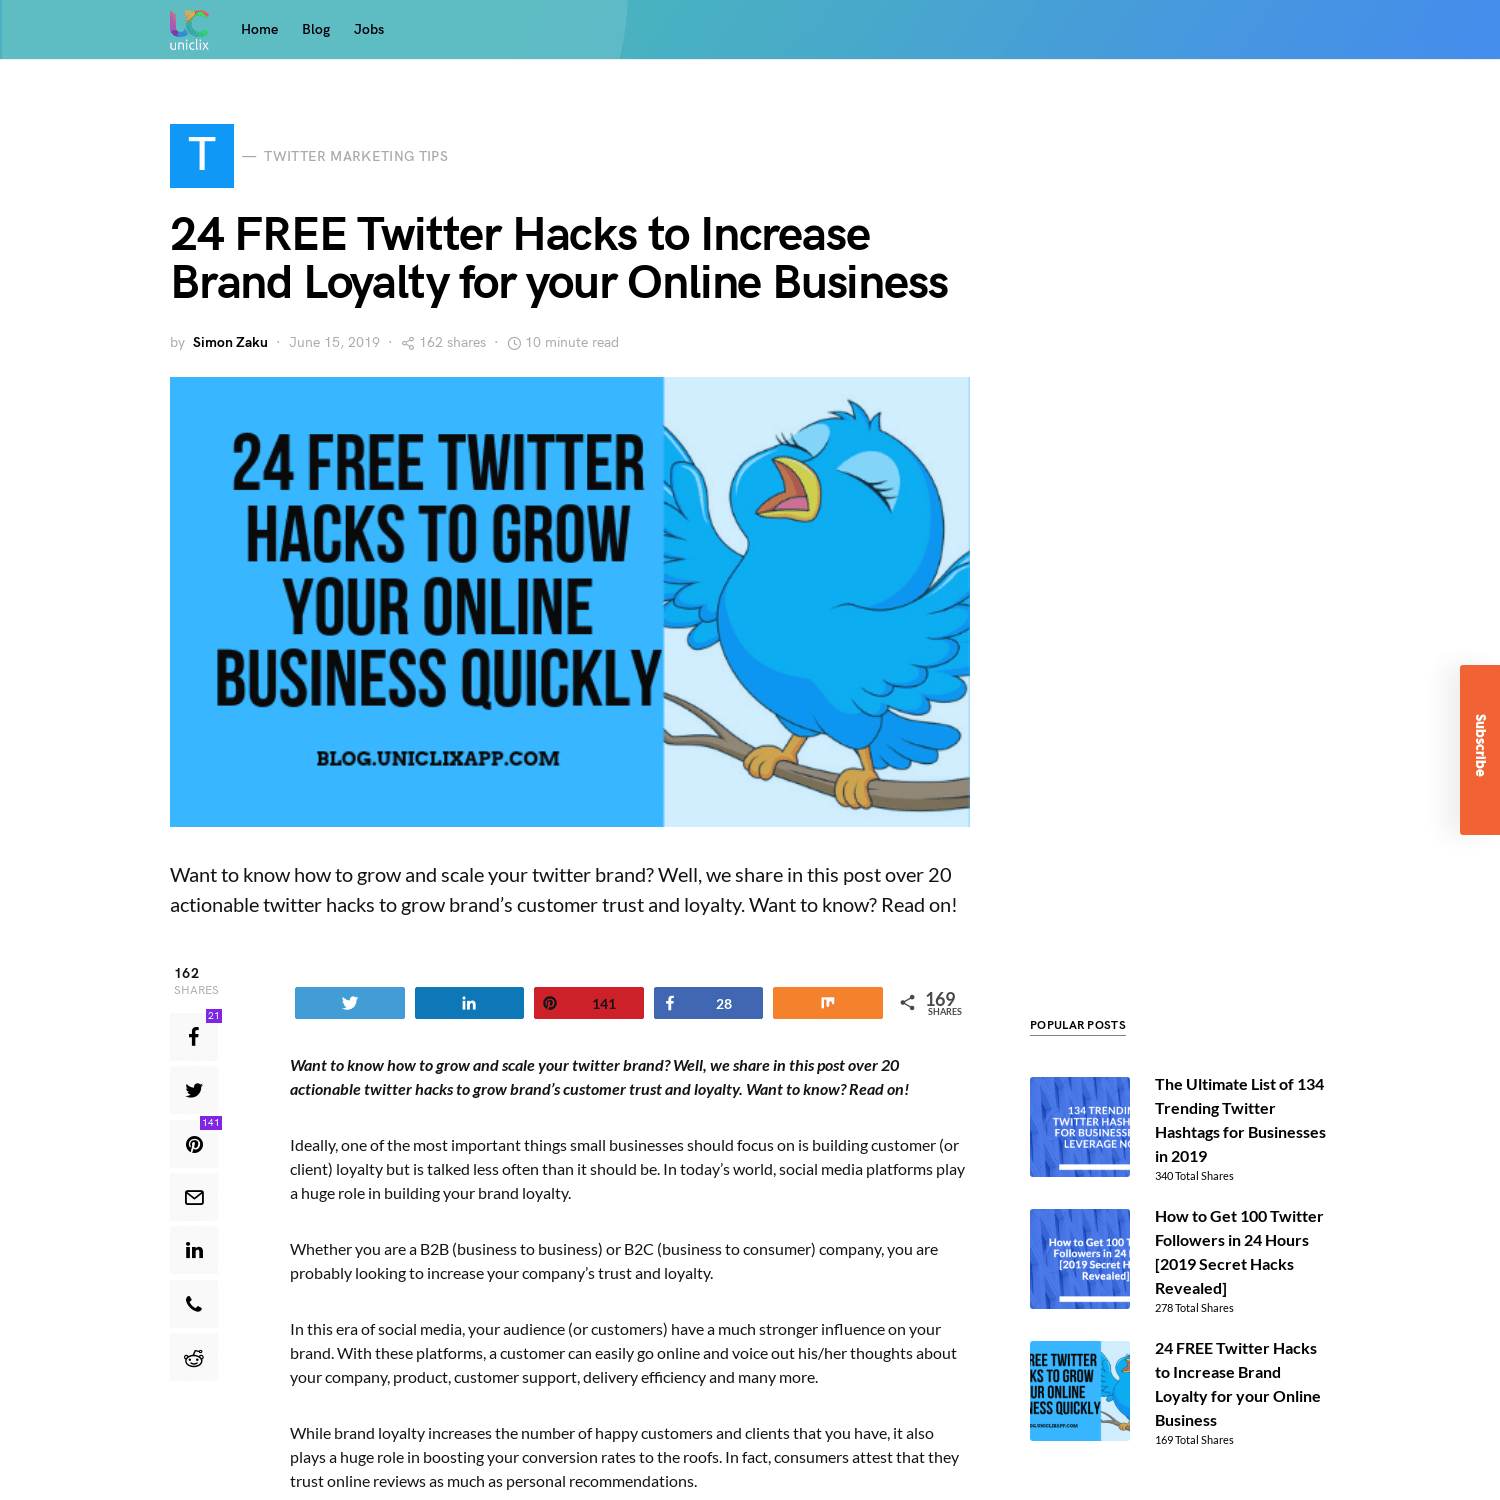 24 FREE Twitter Hacks to Increase Brand Loyalty for your Online Business